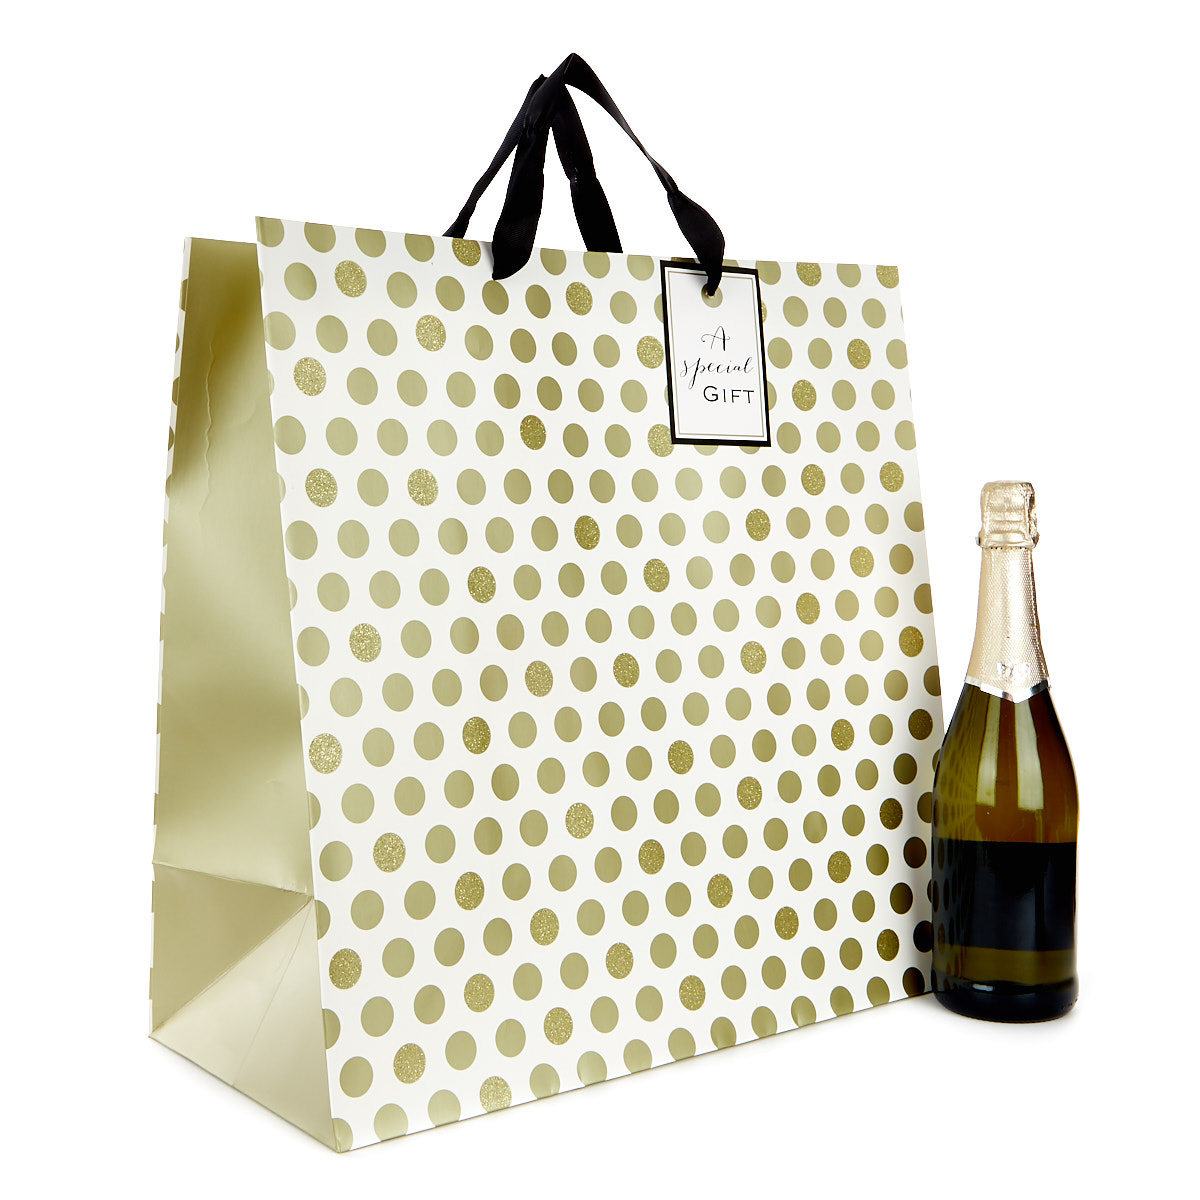 Extra Large Square Cream & Gold Gift Bag - A Special Gift